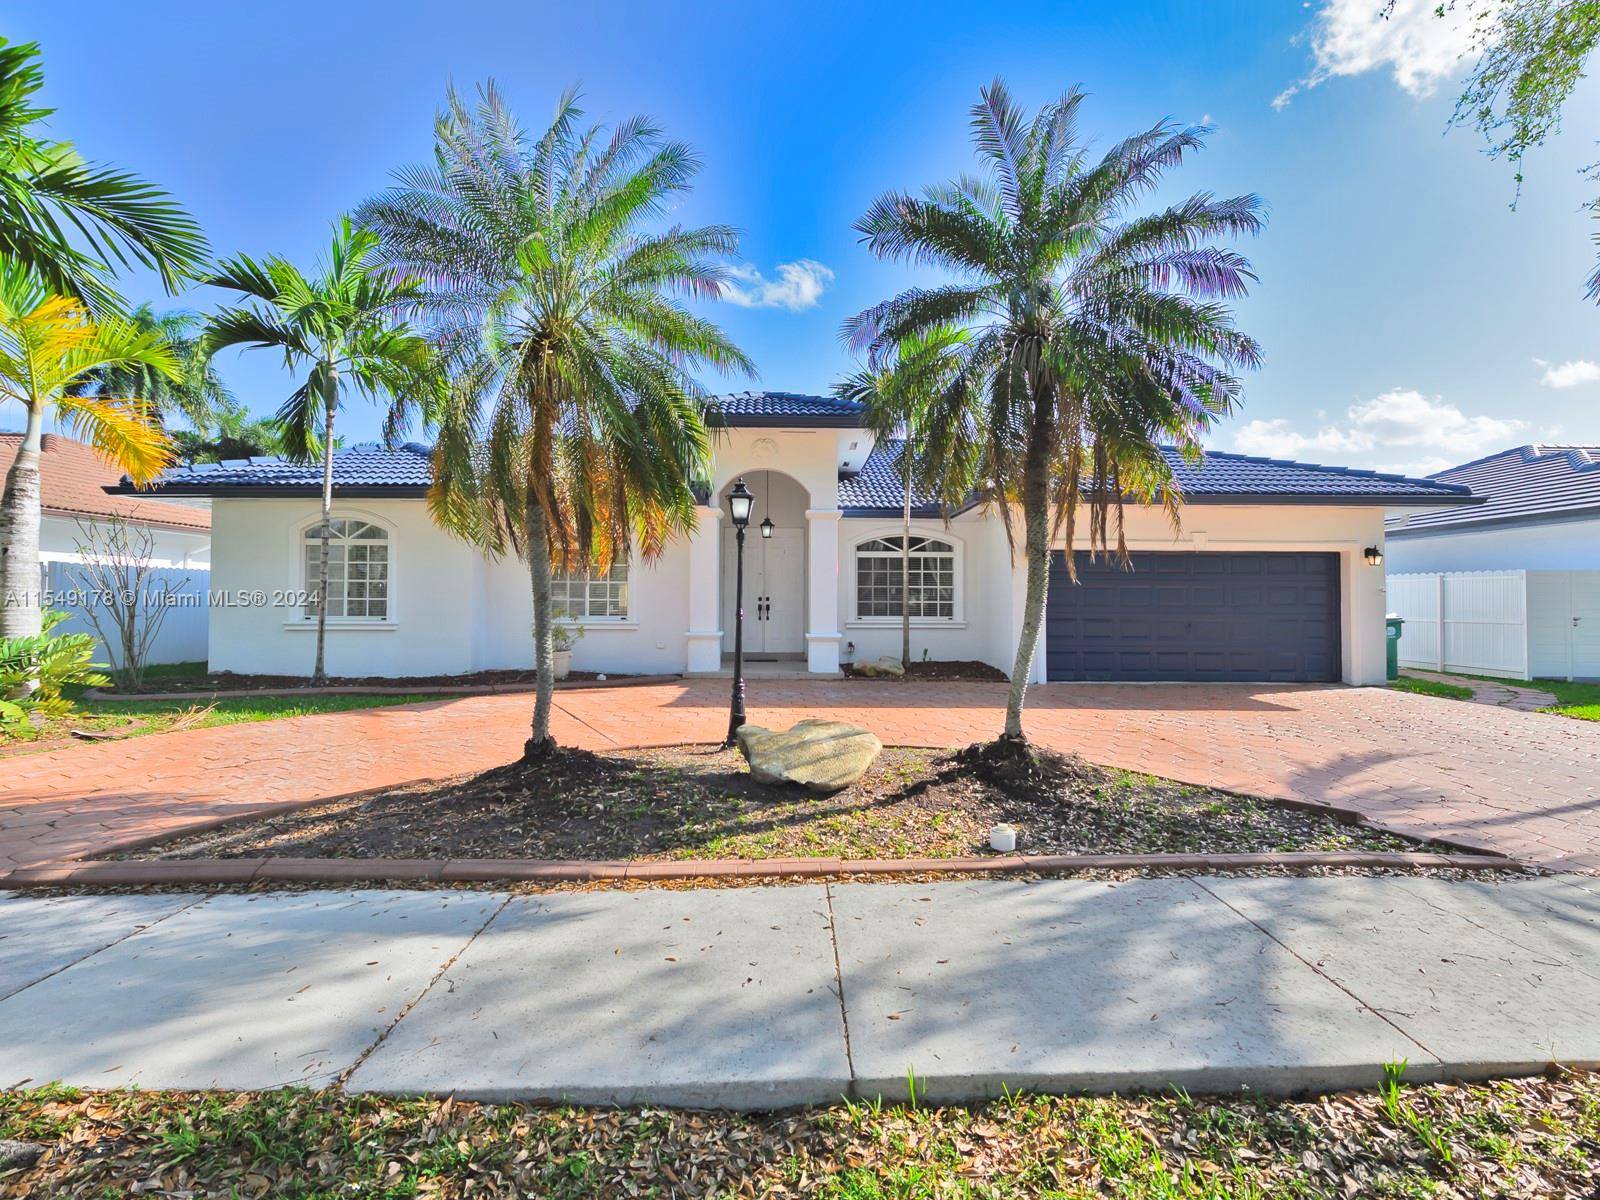 Spectacular 4 Bed 3. 5 Bath pool home located in the exclusively guard gated community of Royal Oaks in Miami Lakes.